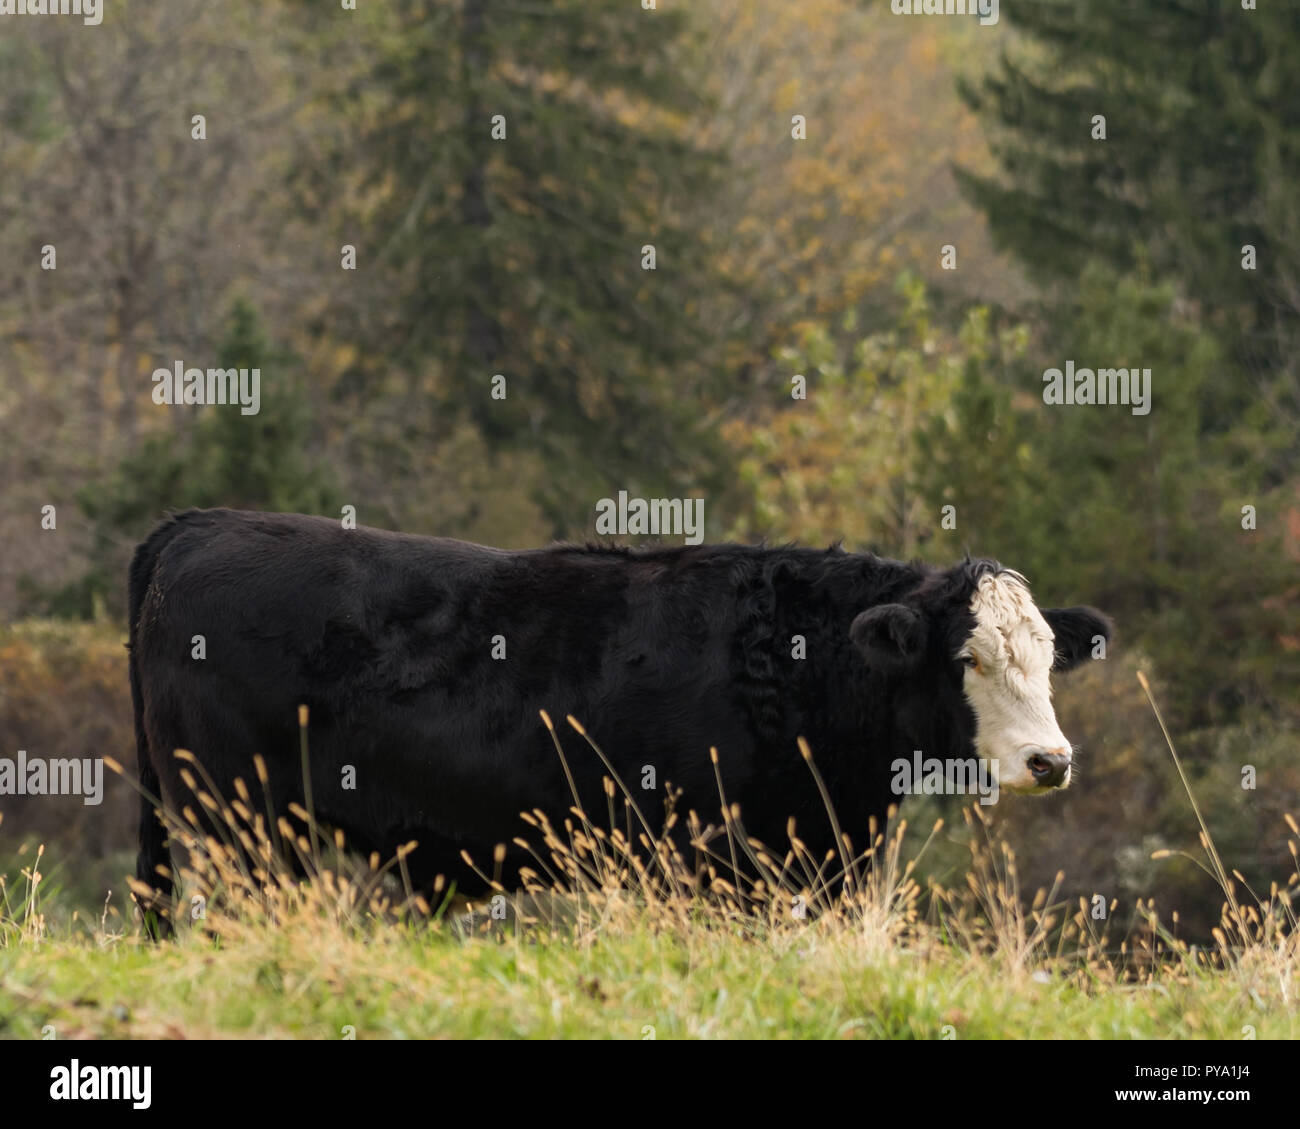 Black cow with white face on rural New England pasture with fall color in background woods Stock Photo